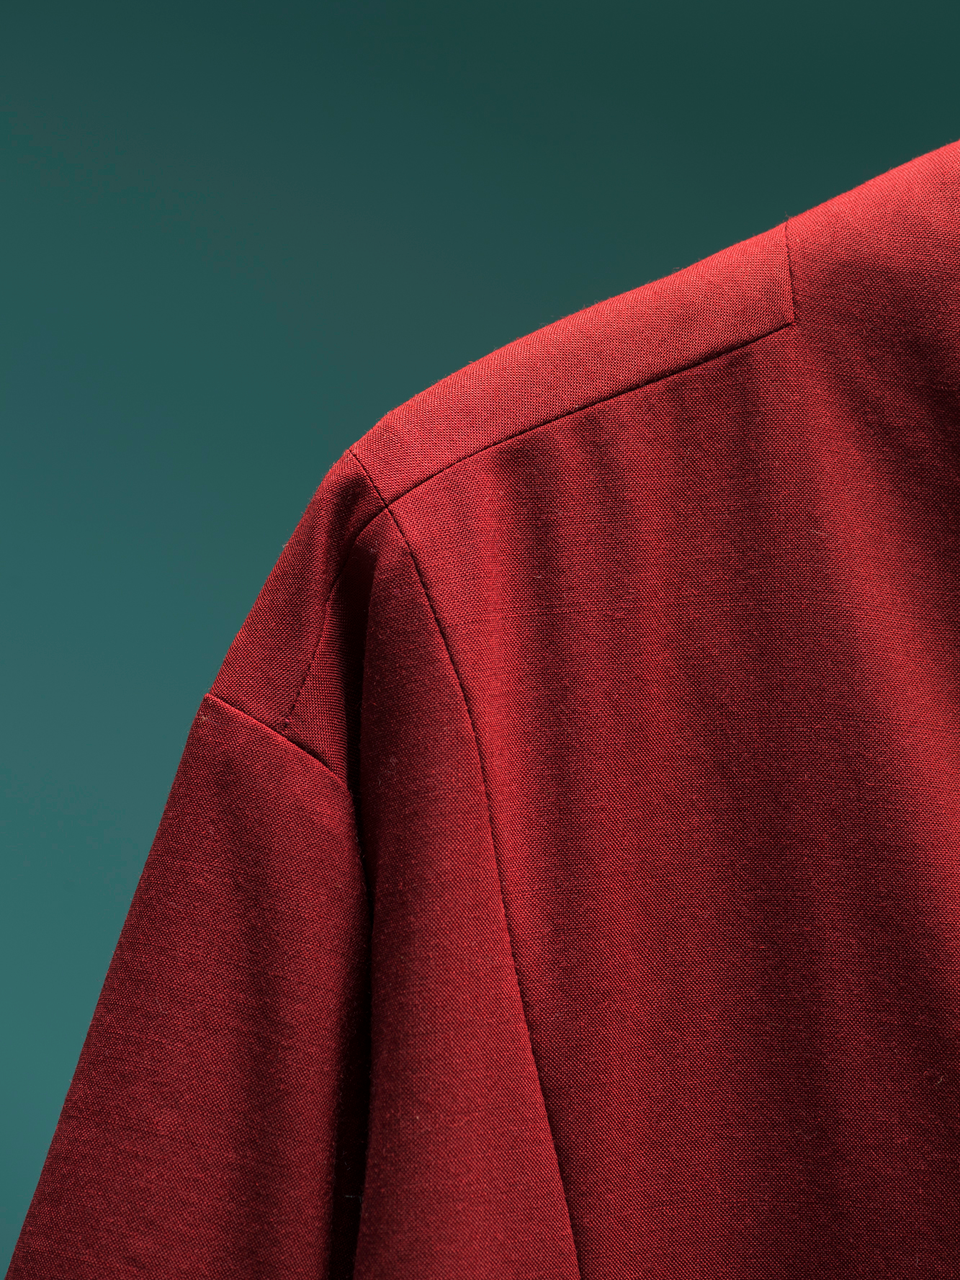 The Private Label Clothing - The Master Burgundy